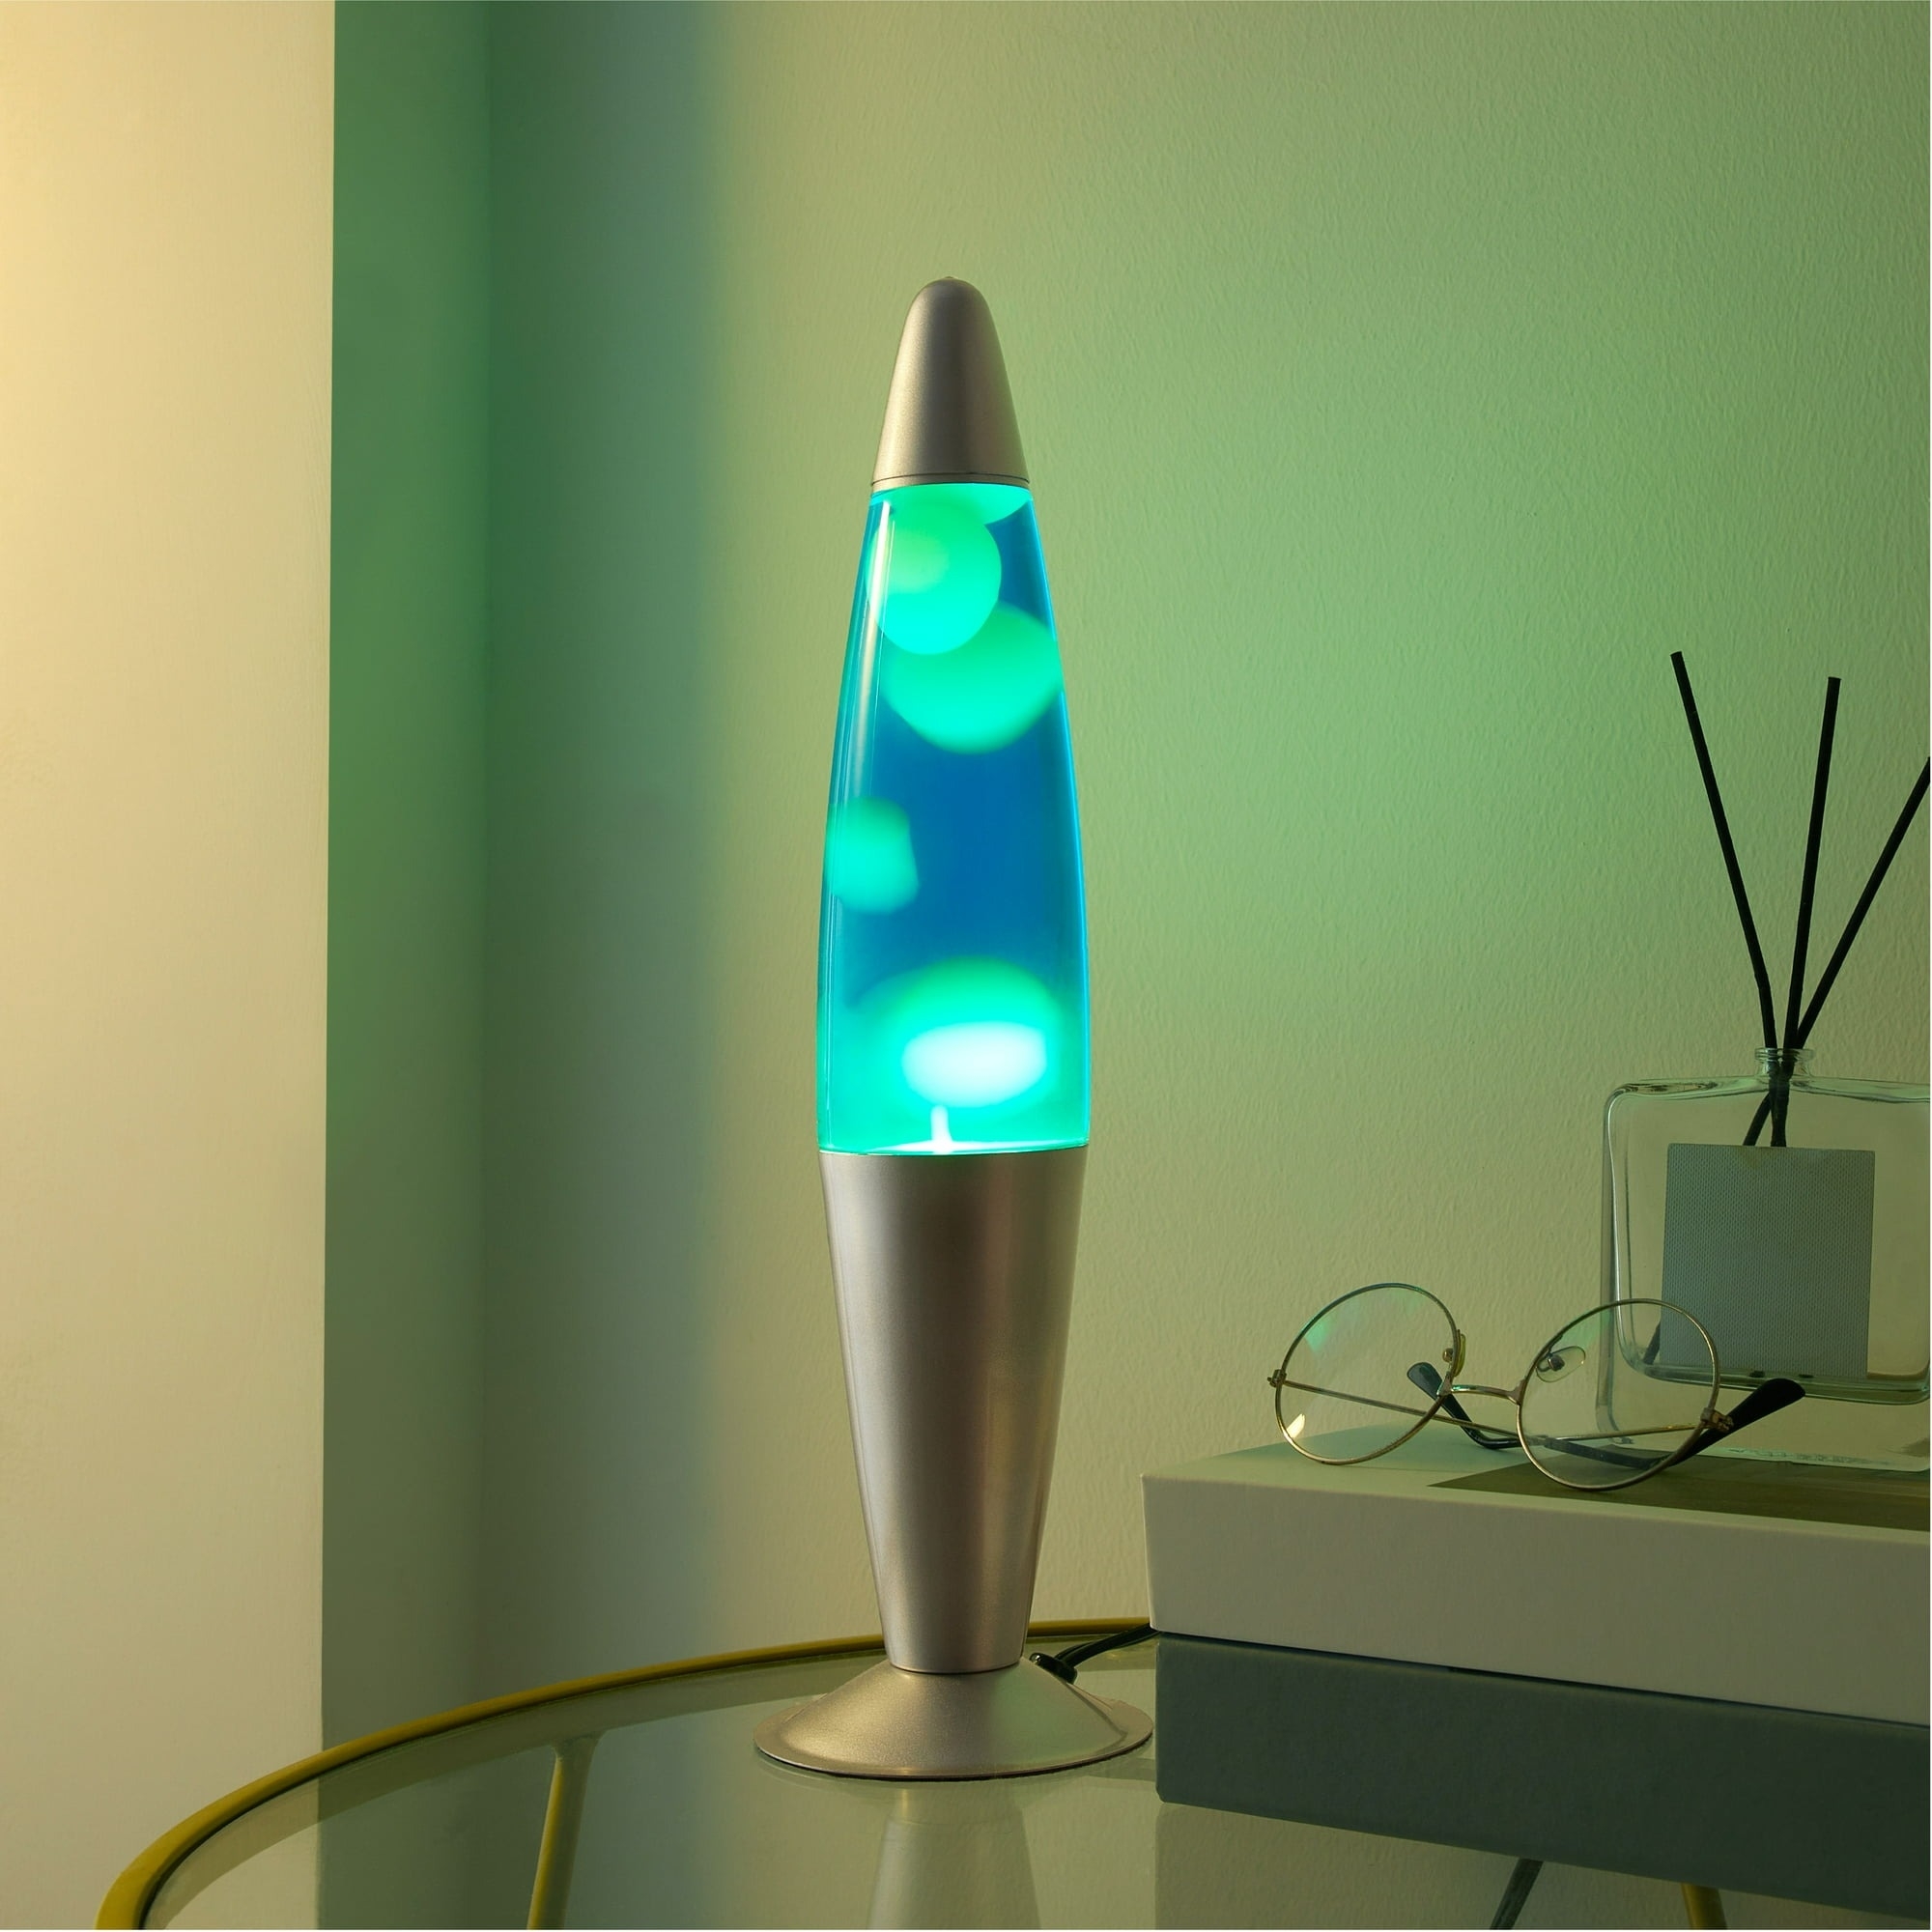 lava lamp on desk in color yellow/blue